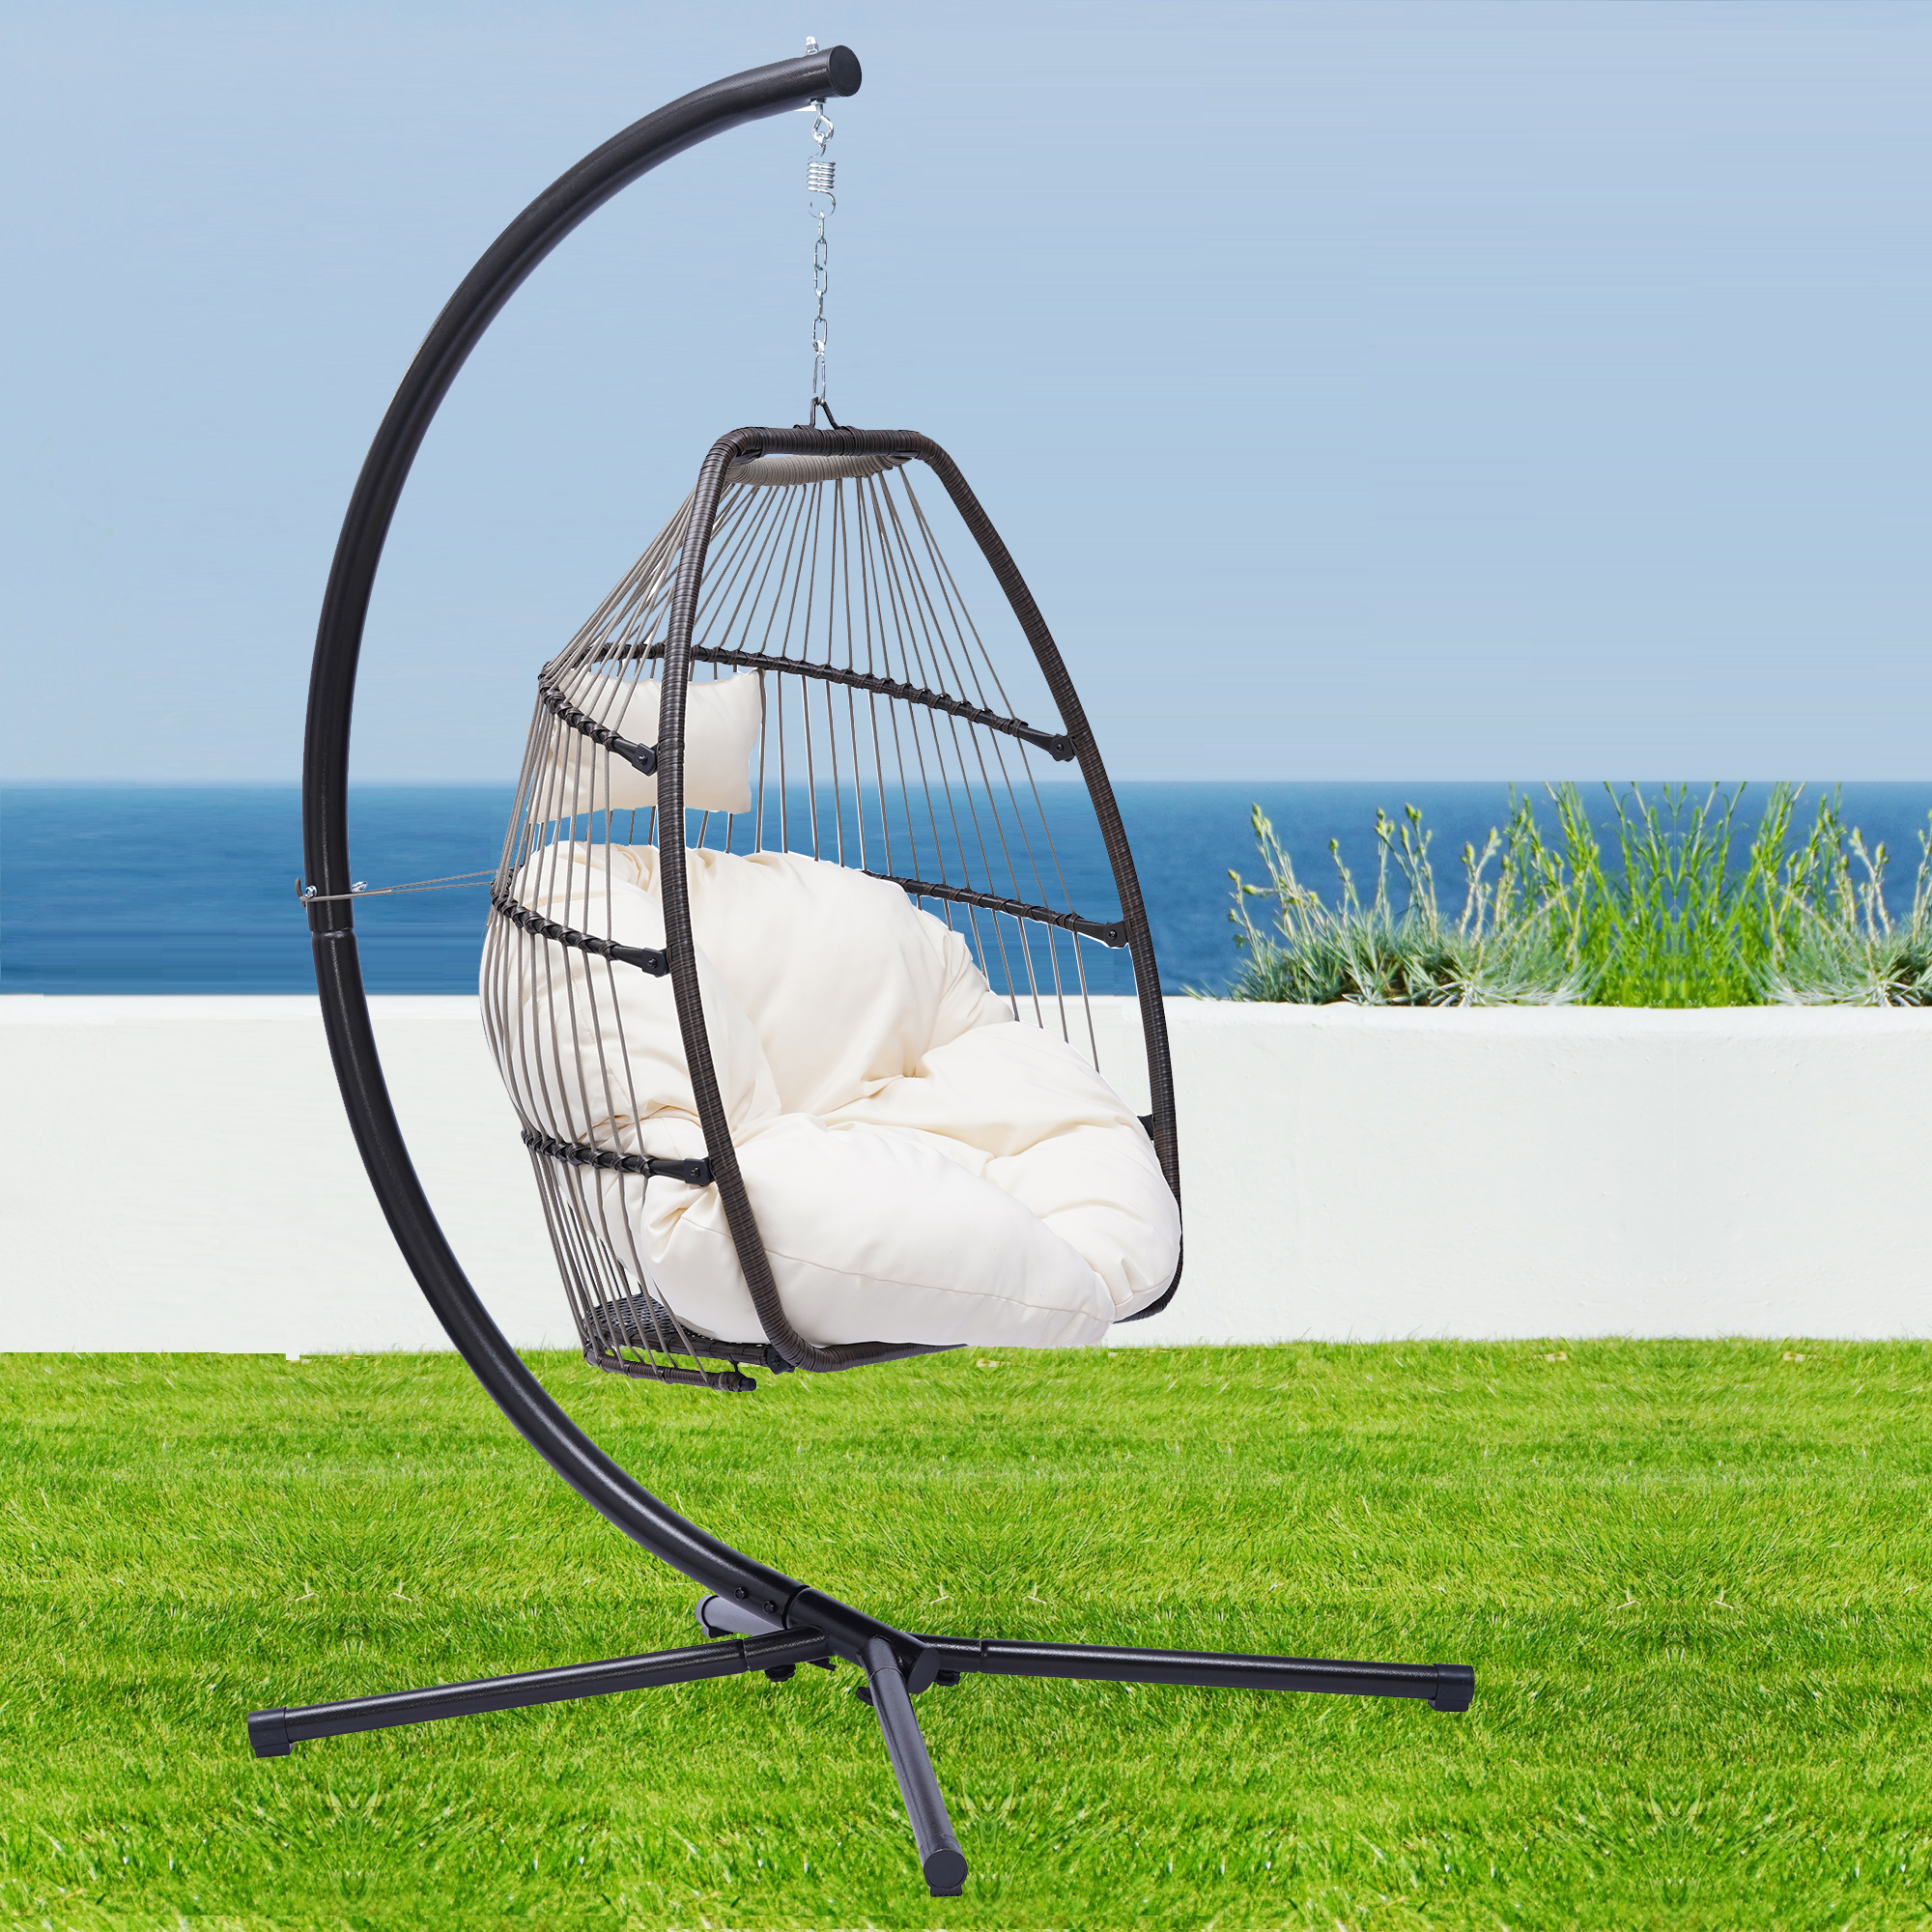 uhomepro Wicker Hanging Egg Chair, Outdoor Patio Furniture with Beige Cushion, Hanging Egg Chair with Stand, Swinging Egg Chair, Outdoor Chair for Beach, Backyard, Pool, Balcony, Lawn, W11040 - image 1 of 6